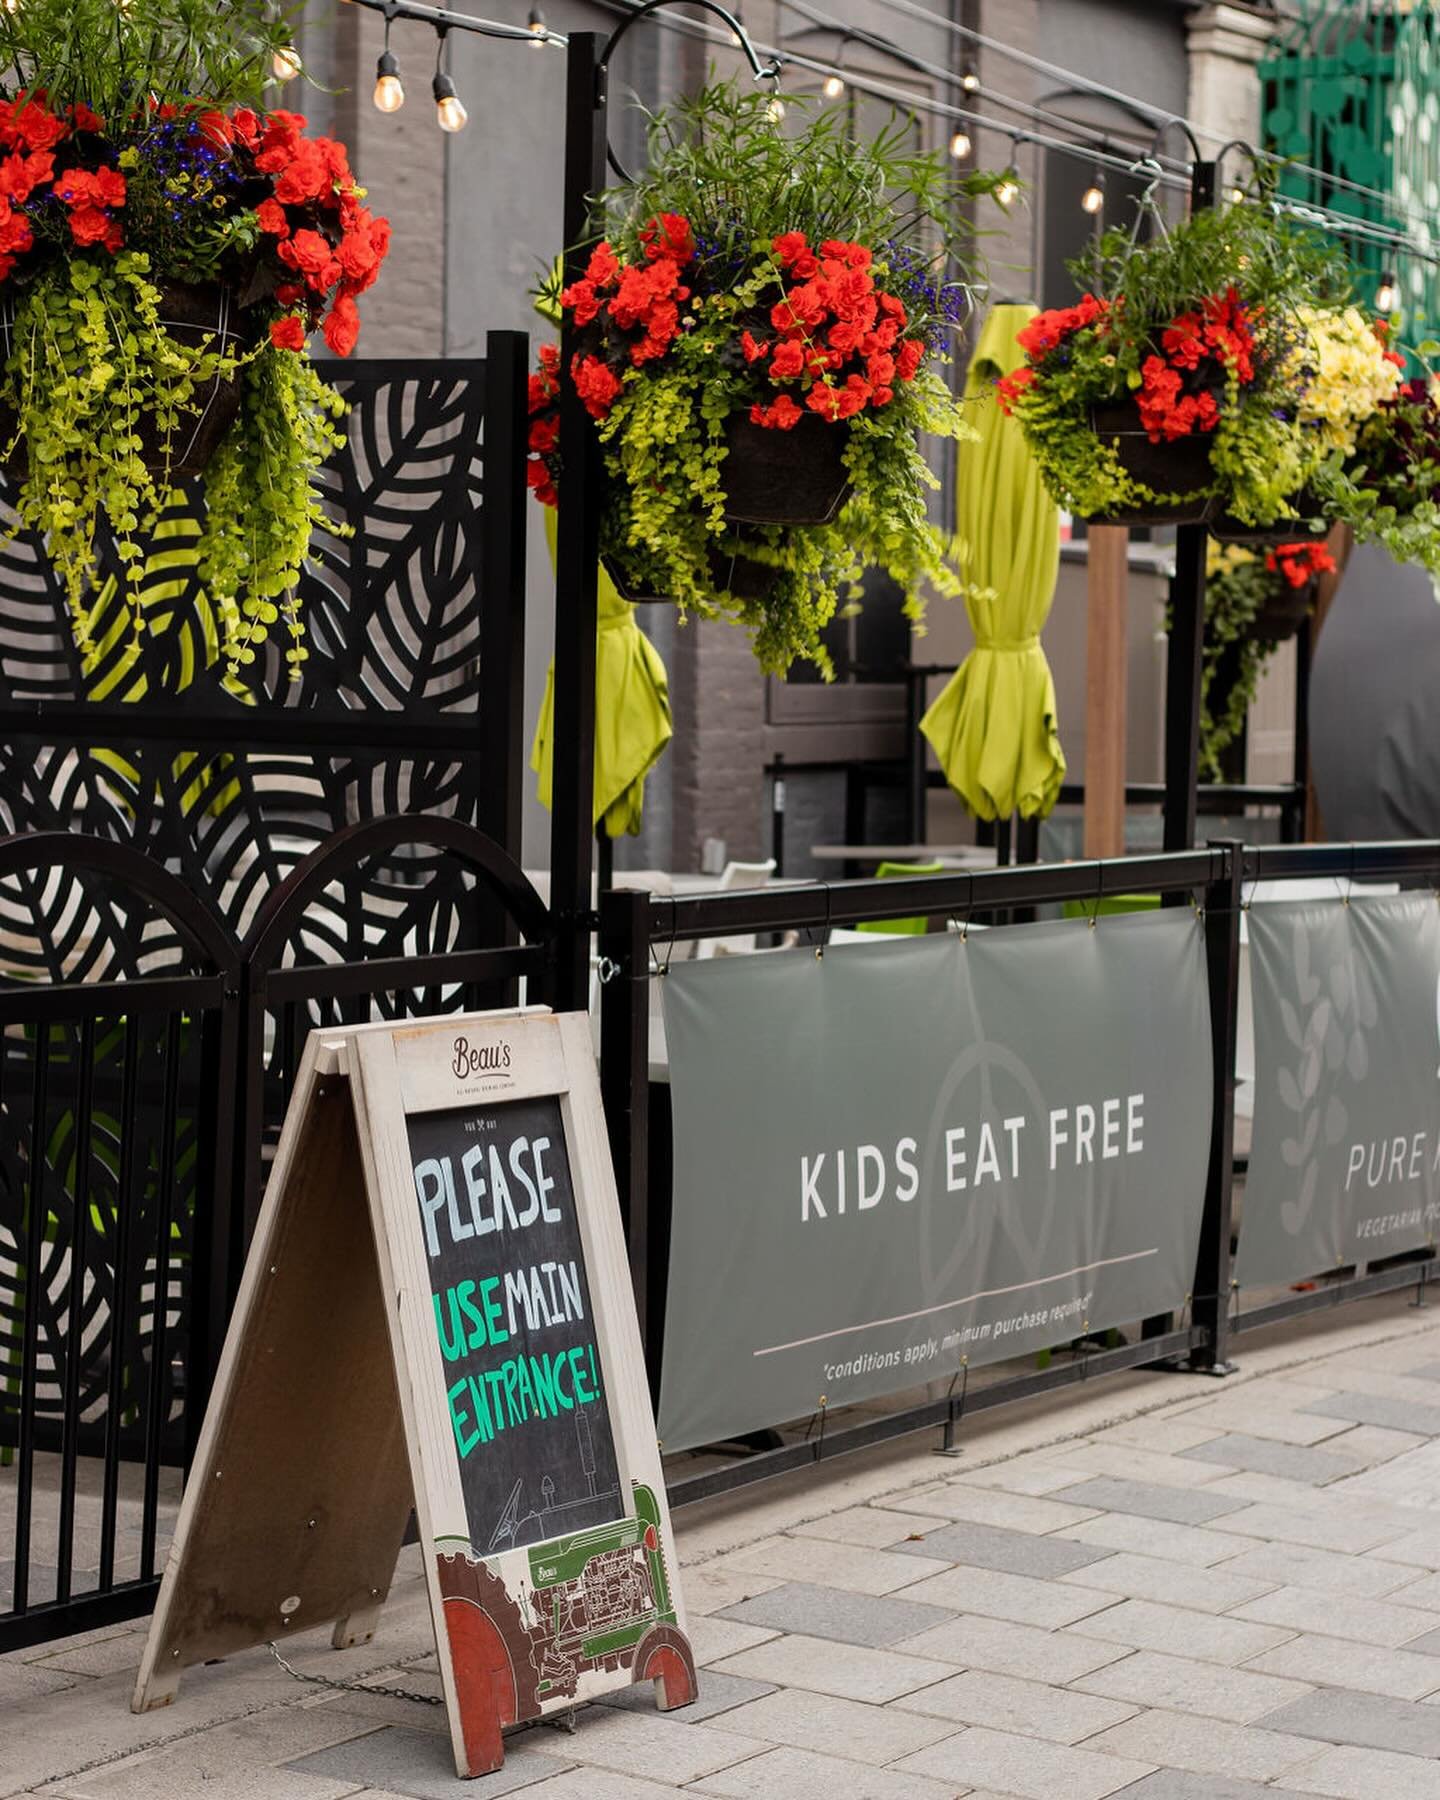 KIDS EAT FREE AT RIDEAU ⬇️

Come downtown and explore the Market, museums, shop and stop by Pure Kitchen Rideau with the whole fam! 

Also, Mother&rsquo;s Day is coming up! *hint hint. 

See our kids menu online. 
👉 @purekitchenottawa 

*some restri